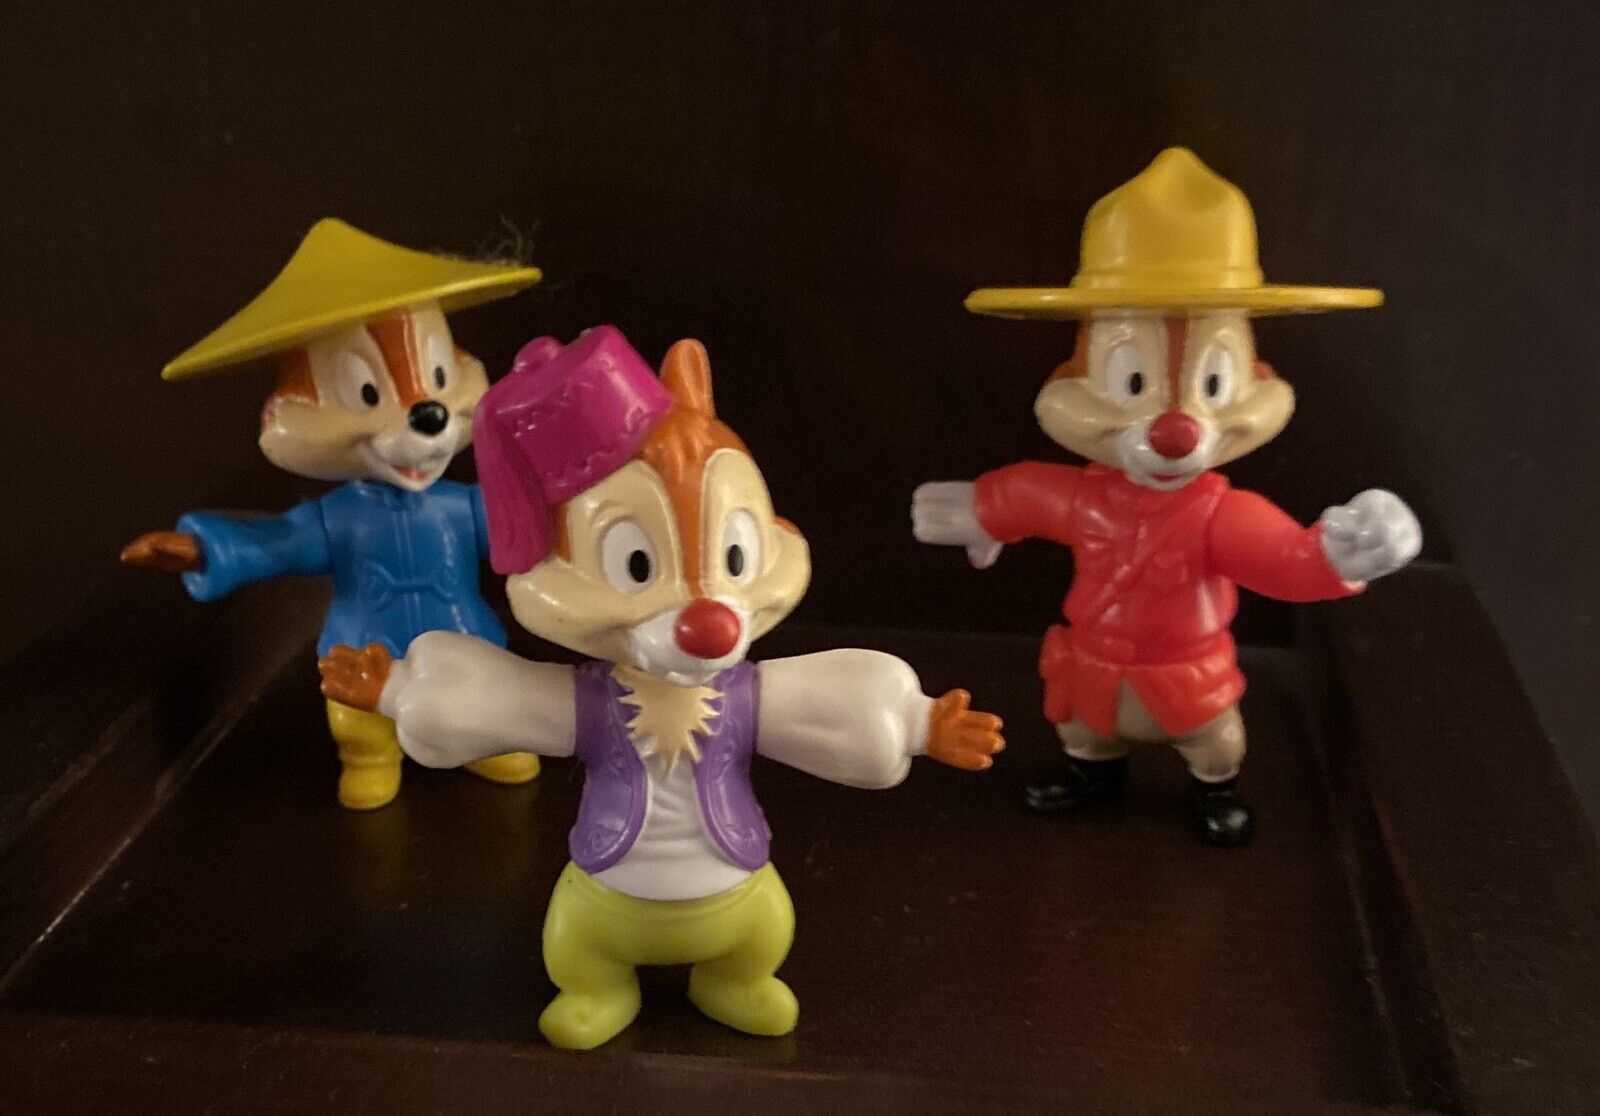 The Chipmunks Chip And Dale , McDonalds Toys From Disney Epcot Center Florida